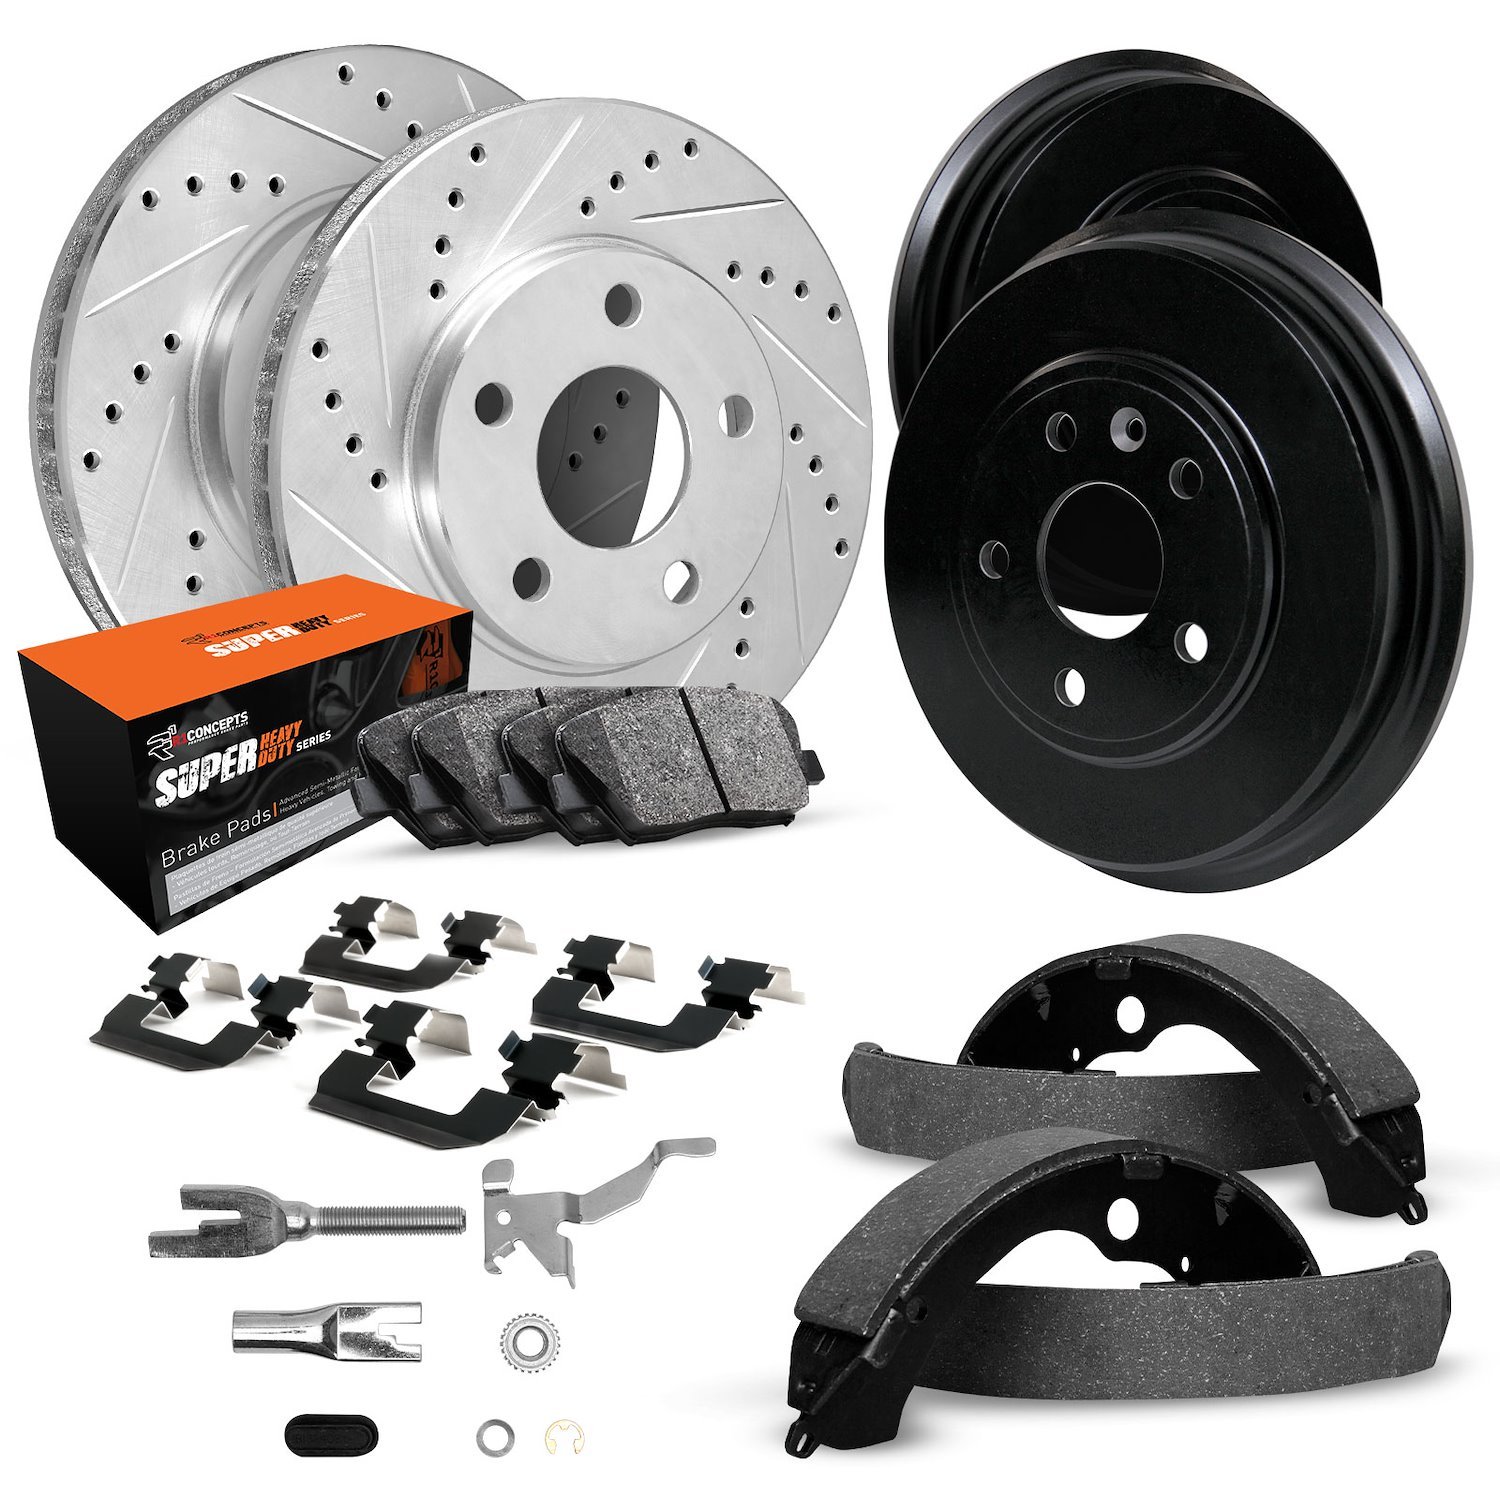 E-Line Drilled/Slotted Silver Rotor & Drum Set w/Super-Duty Pads, Shoes/Hardware/Adjusters, 1990-1999 Mopar